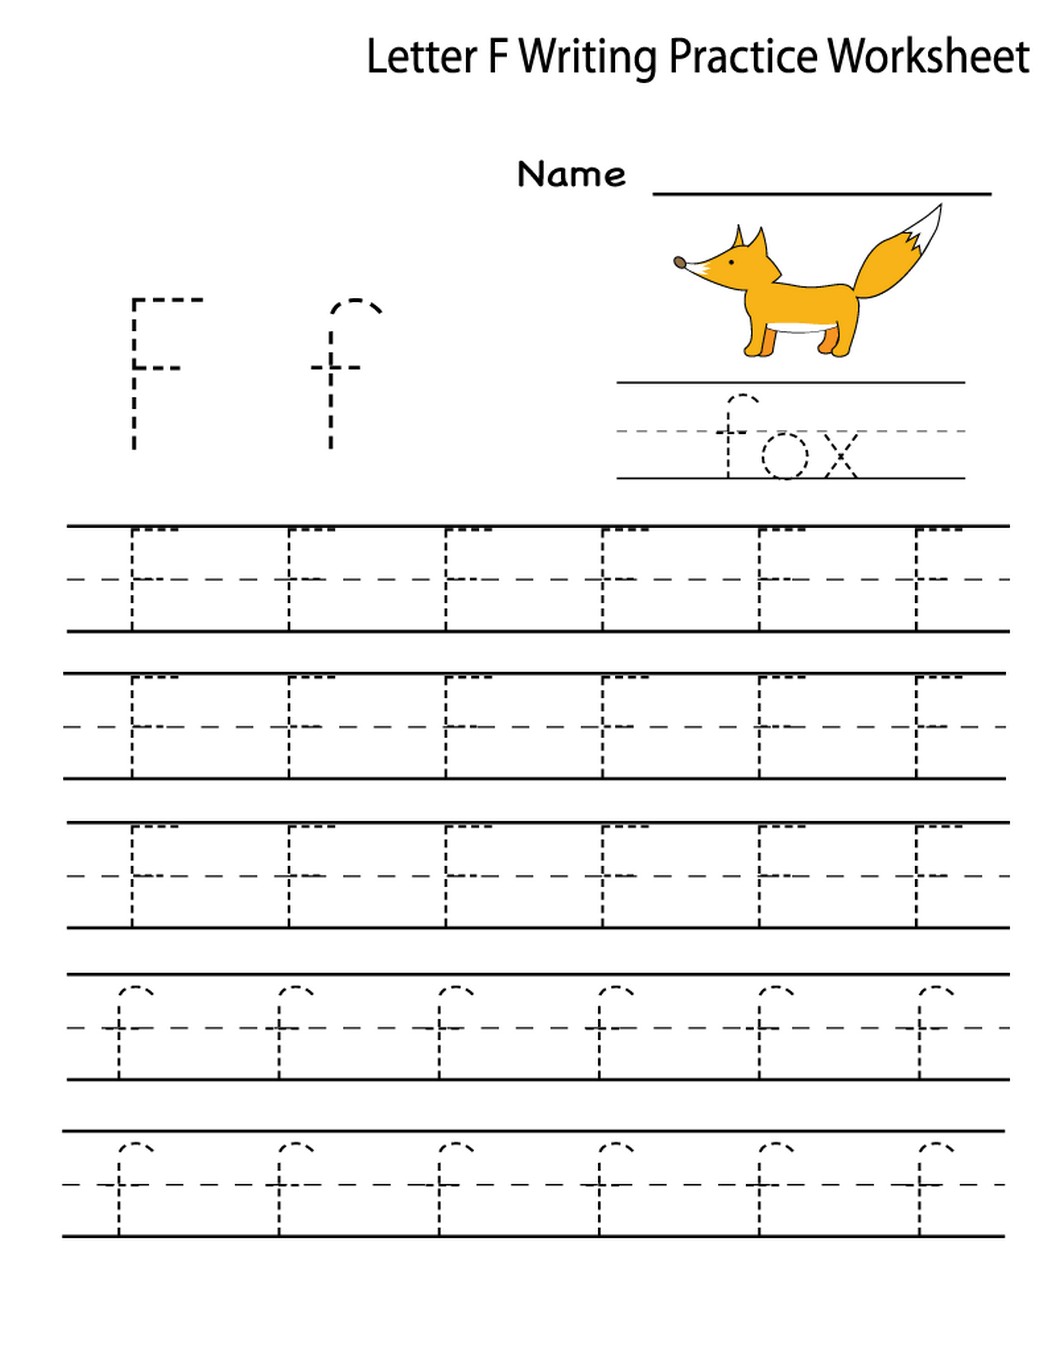 Letter F Worksheet Activities free